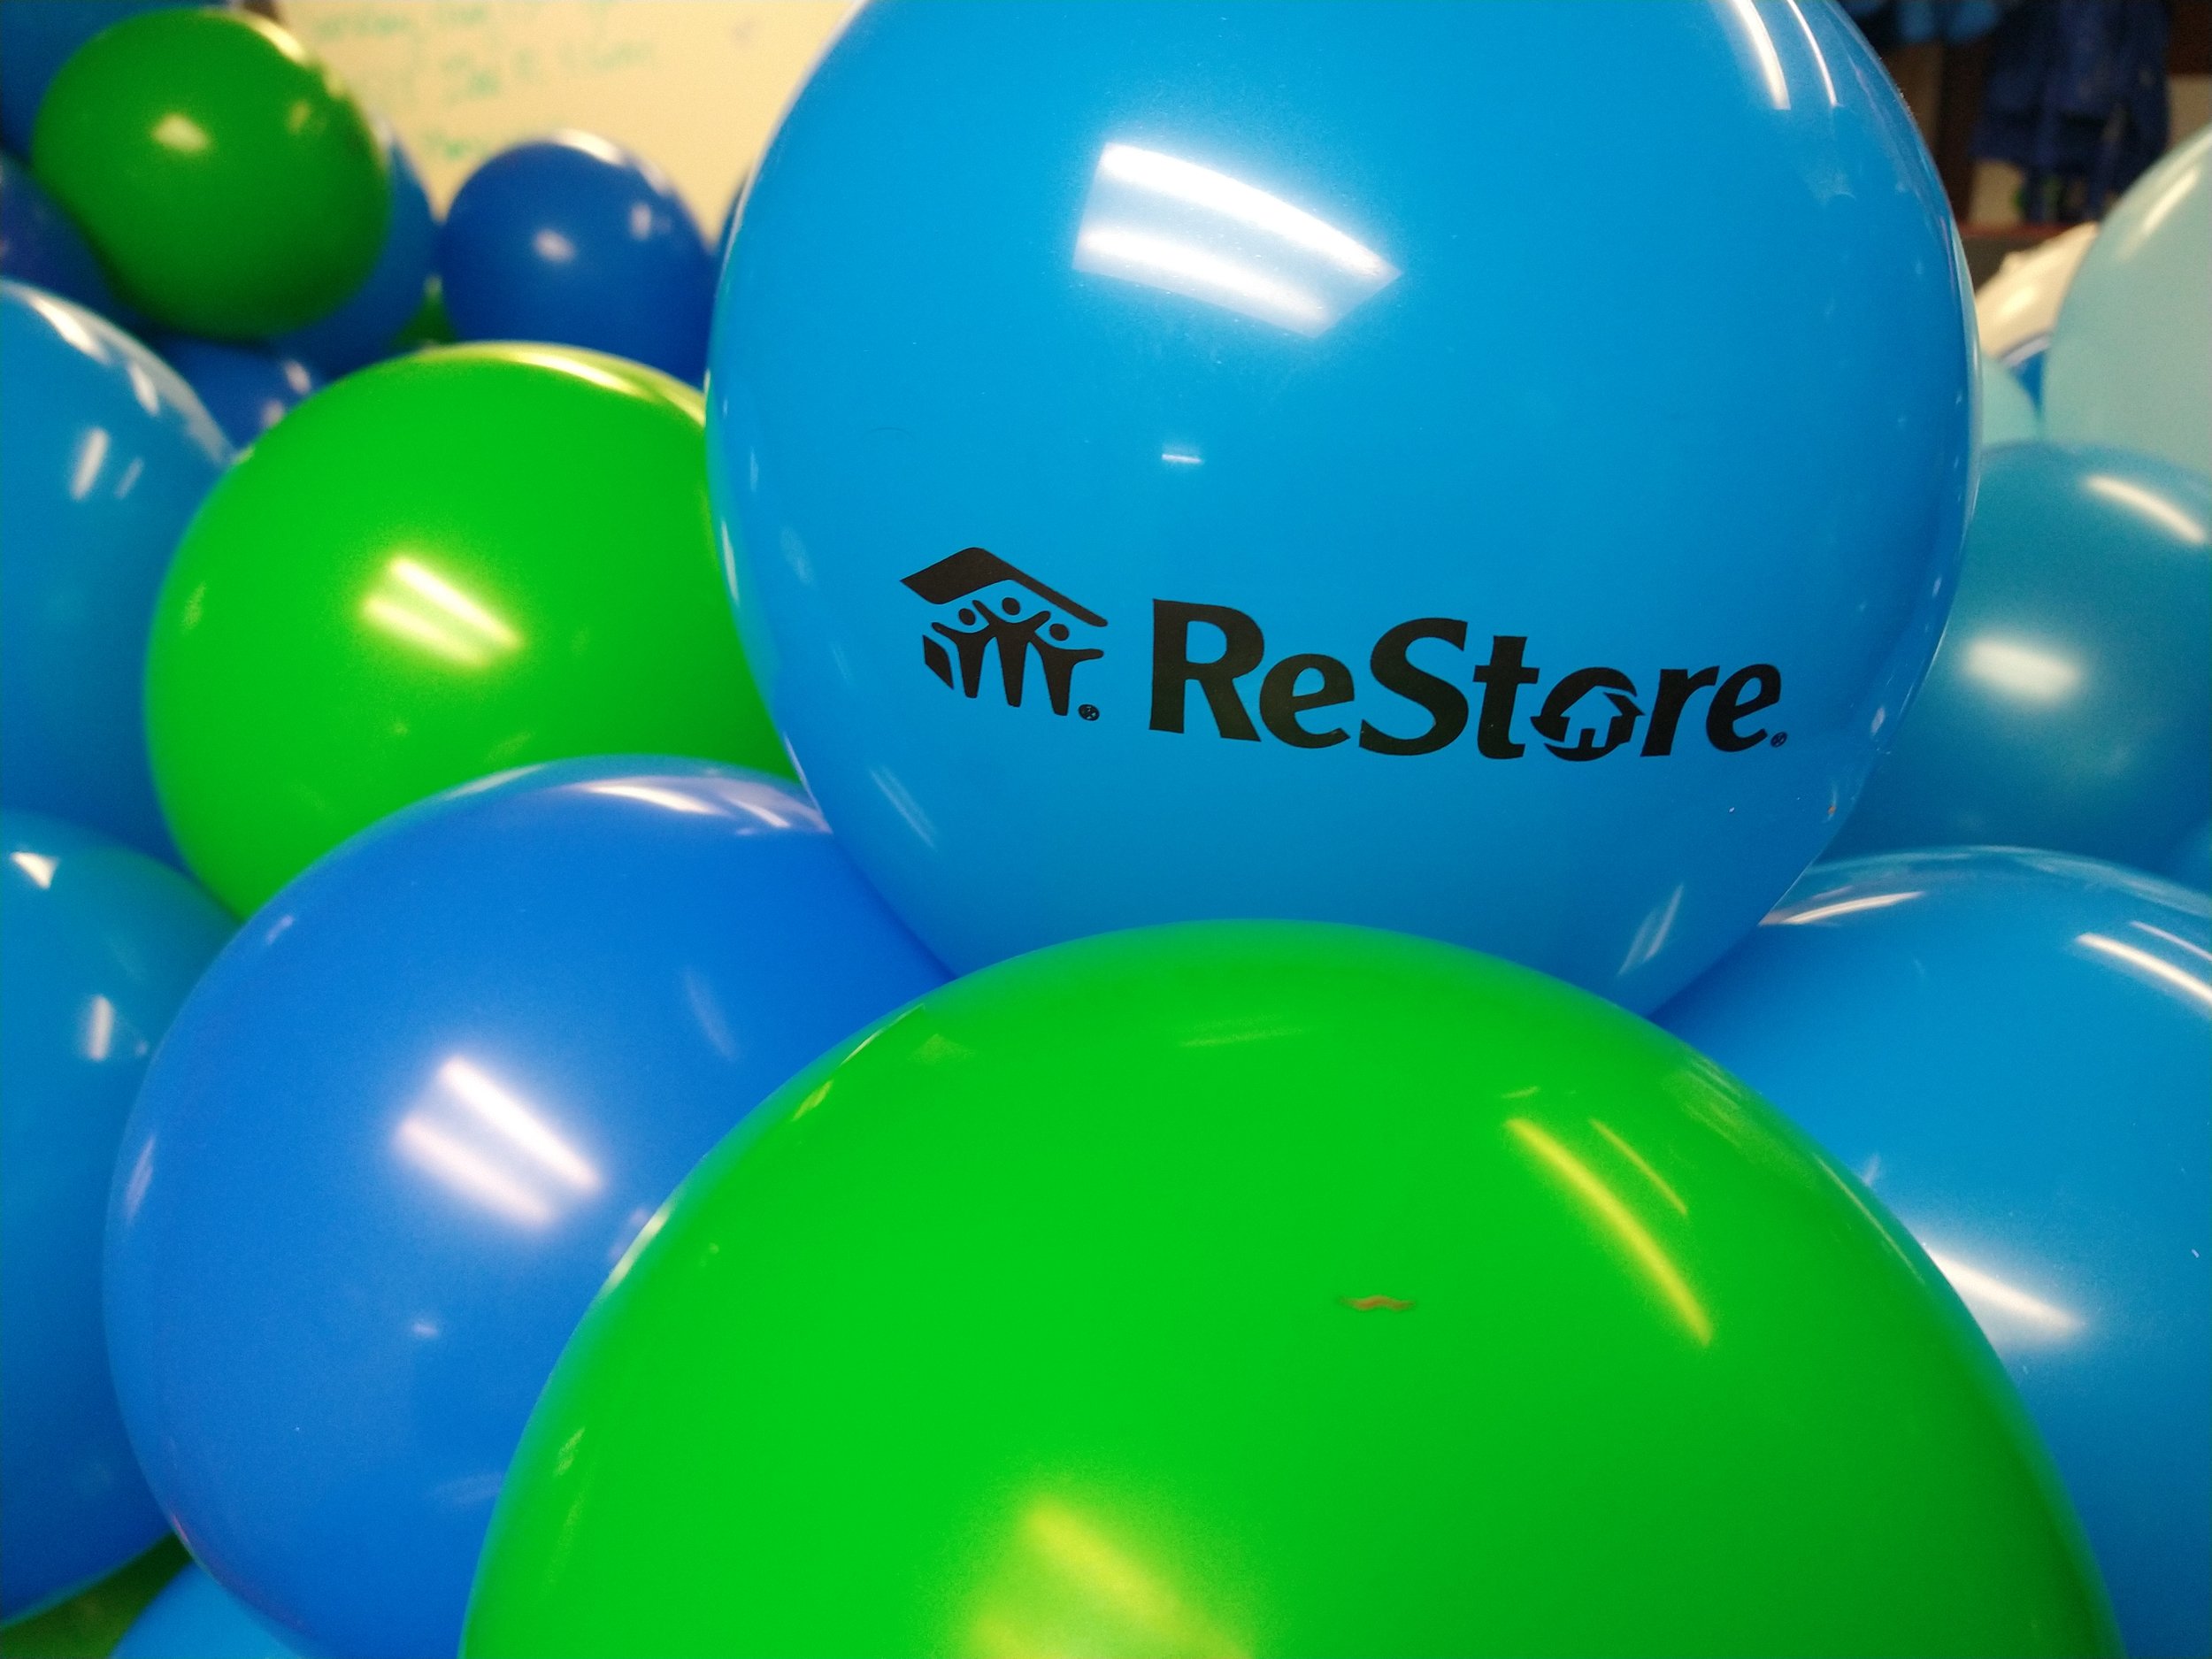 Green and blue balloons with the ReStore logo